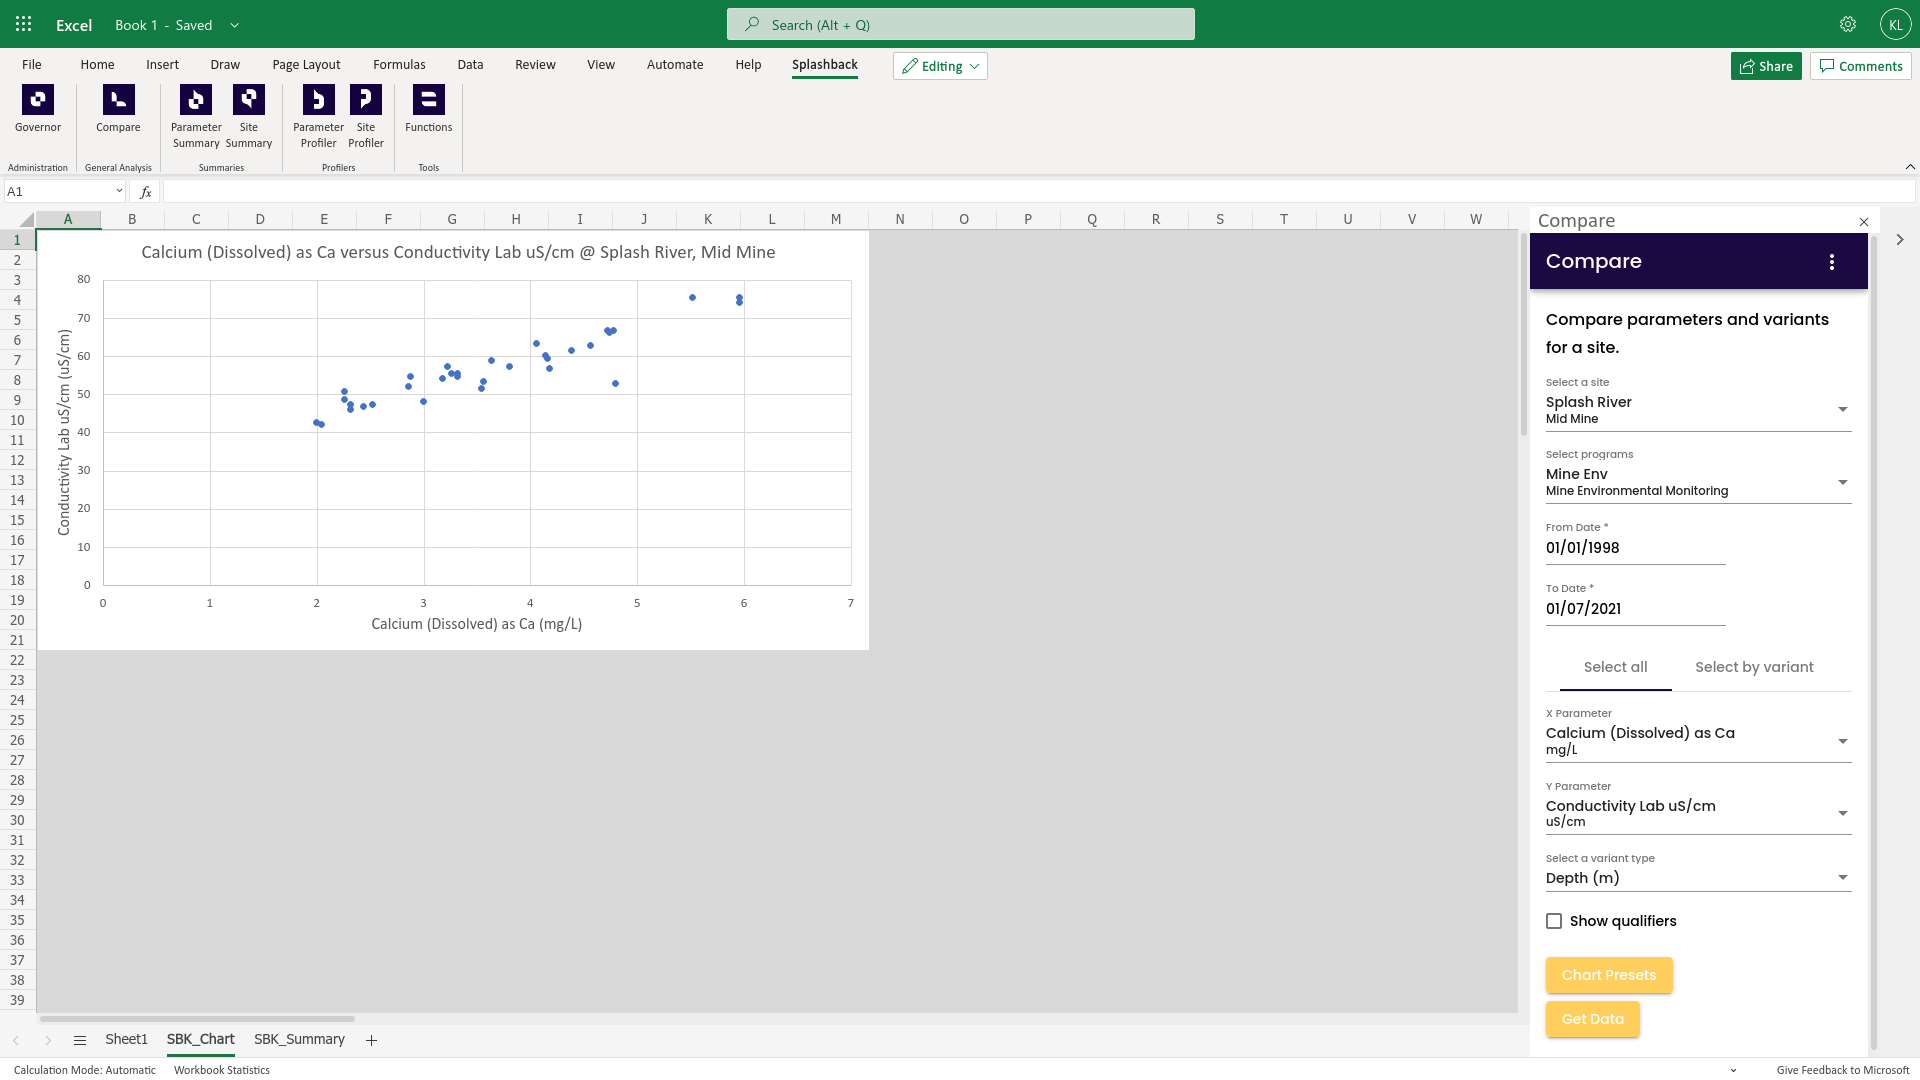 Splashback comparison of multiple parameters in a chart using our Excel add-in.